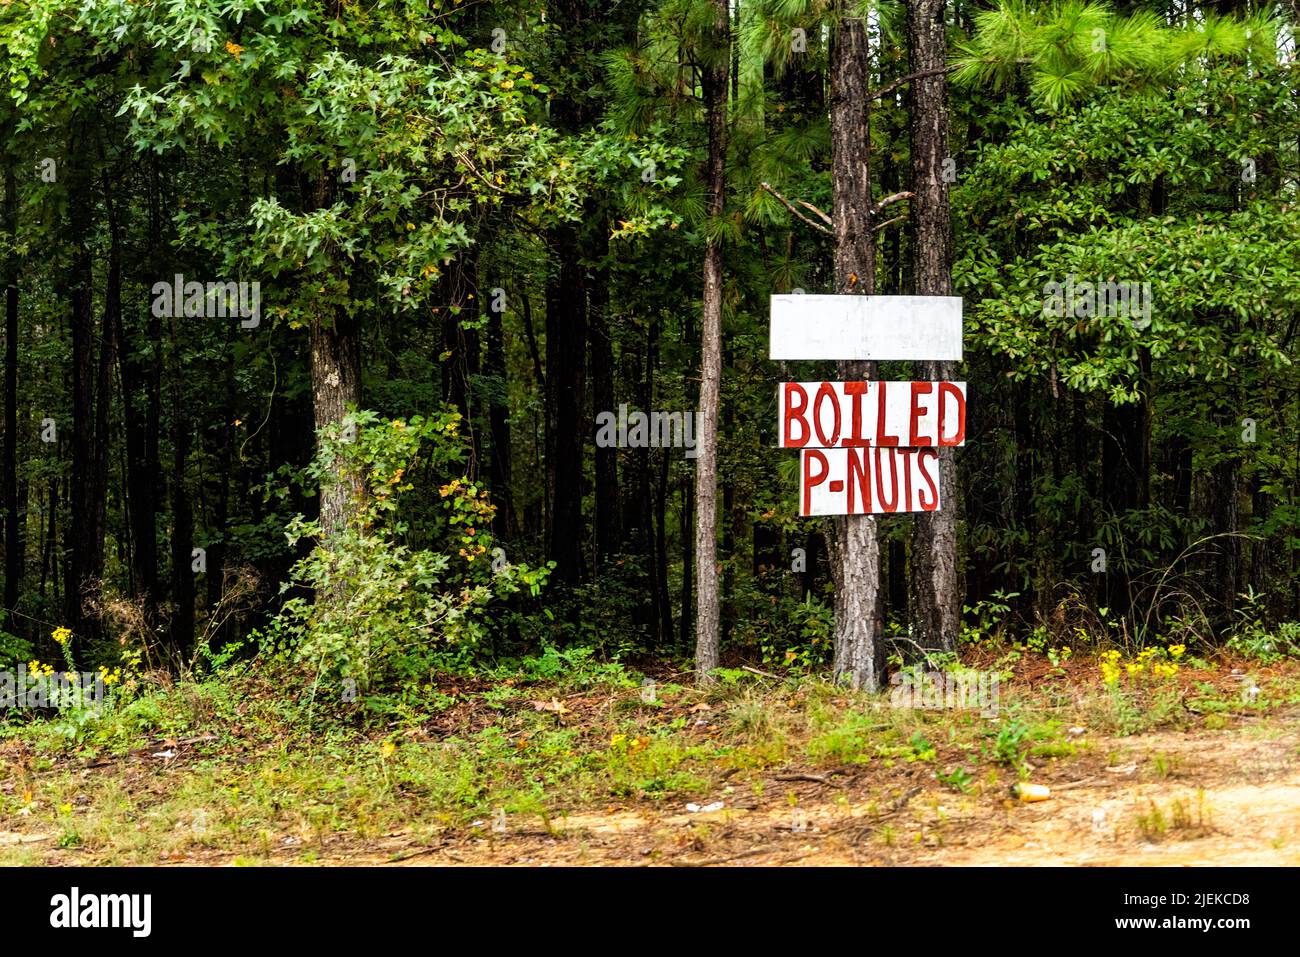 Sign in Eatonton, Georgia for Boiled P-nuts peanuts nuts handwritten in red text on signpost by forest trees as local food advertisement Stock Photo